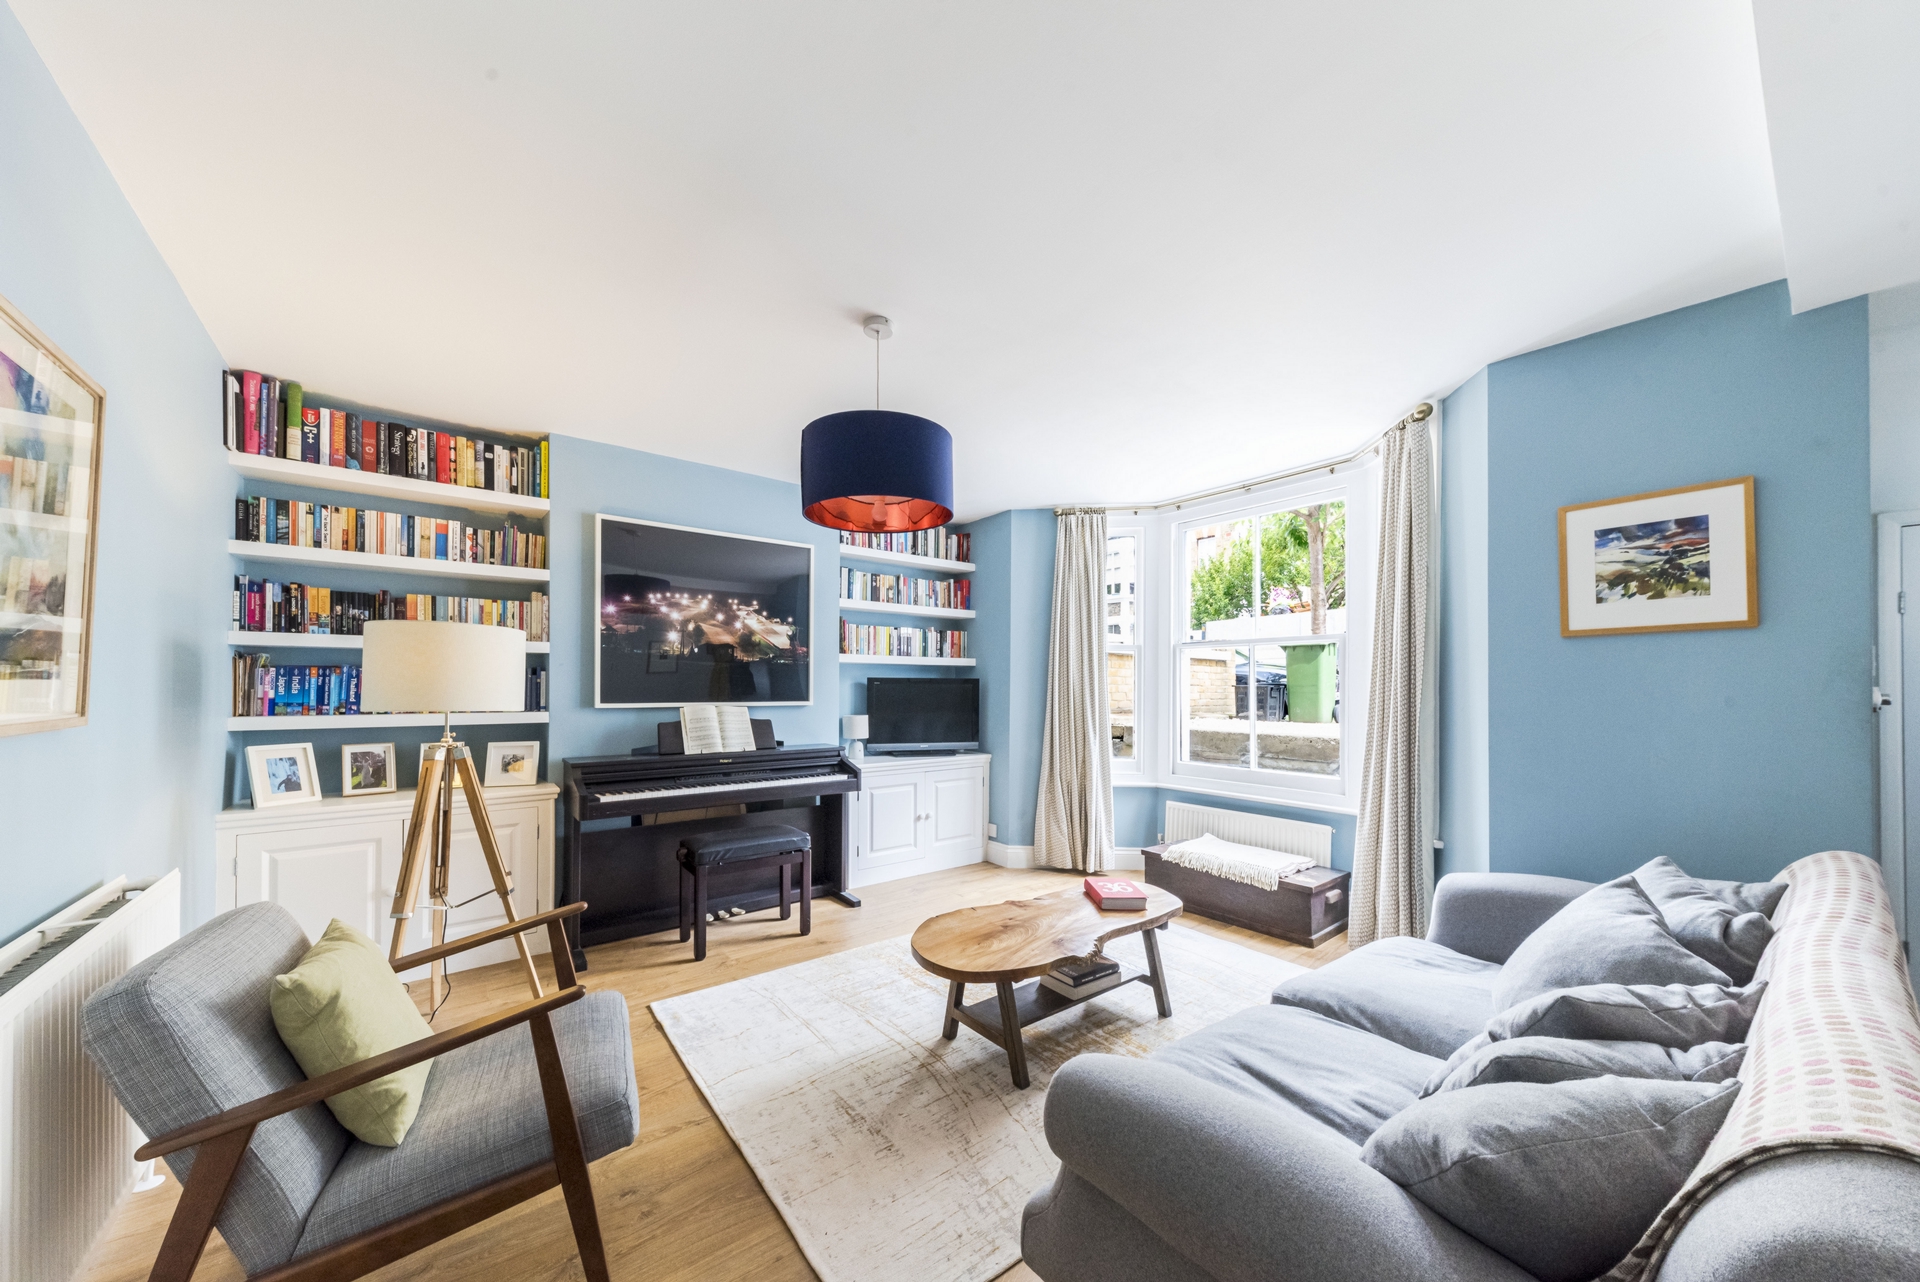 Property For Sale Fordingley Road, Maida Vale, W9 | 2 Bedroom Flat ...